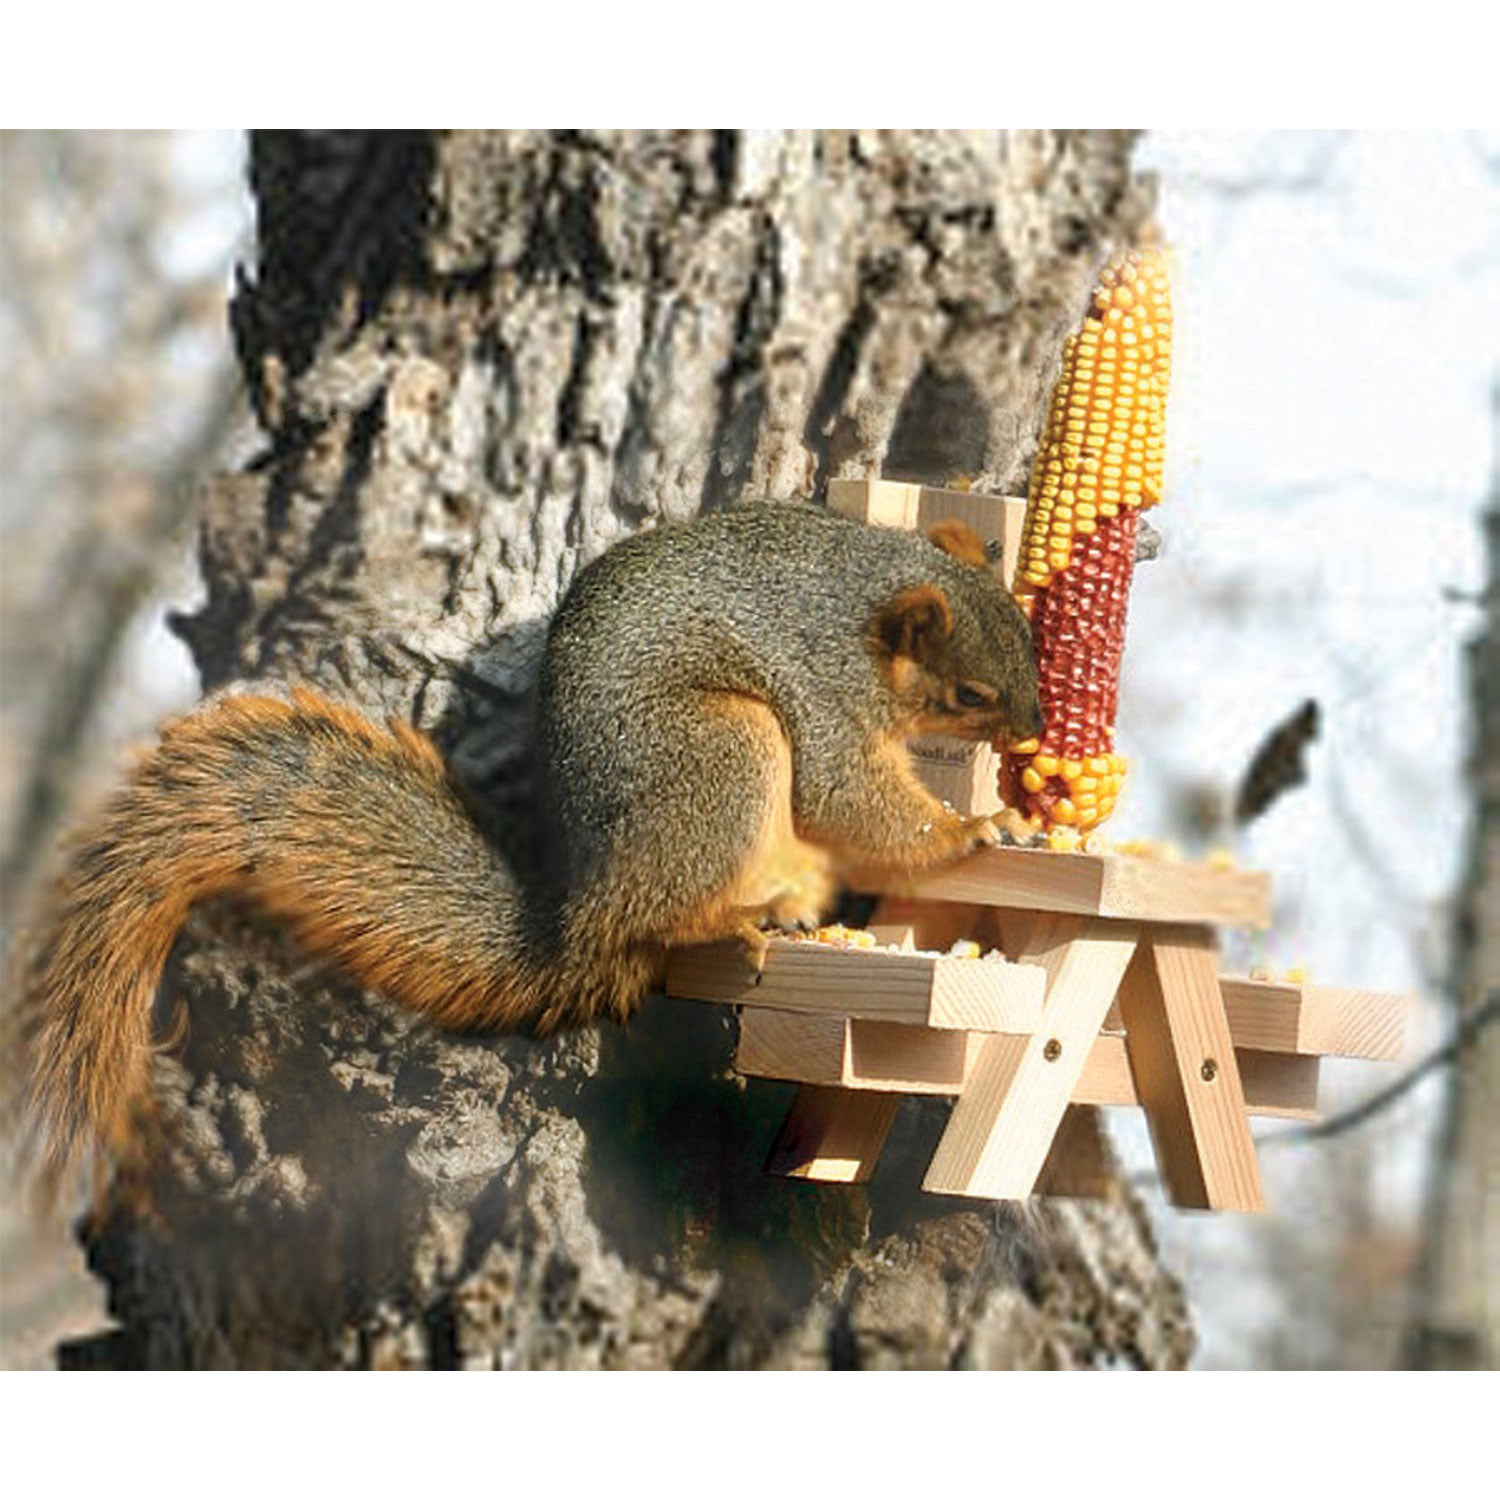 Fruits Berries & Seeds Picnic Table Squirrel Feeder,Squirrel Feeder Corn Cob Holder  for Outside for Holding Nuts Gonioa Wooden Squirrel Feeder Table 